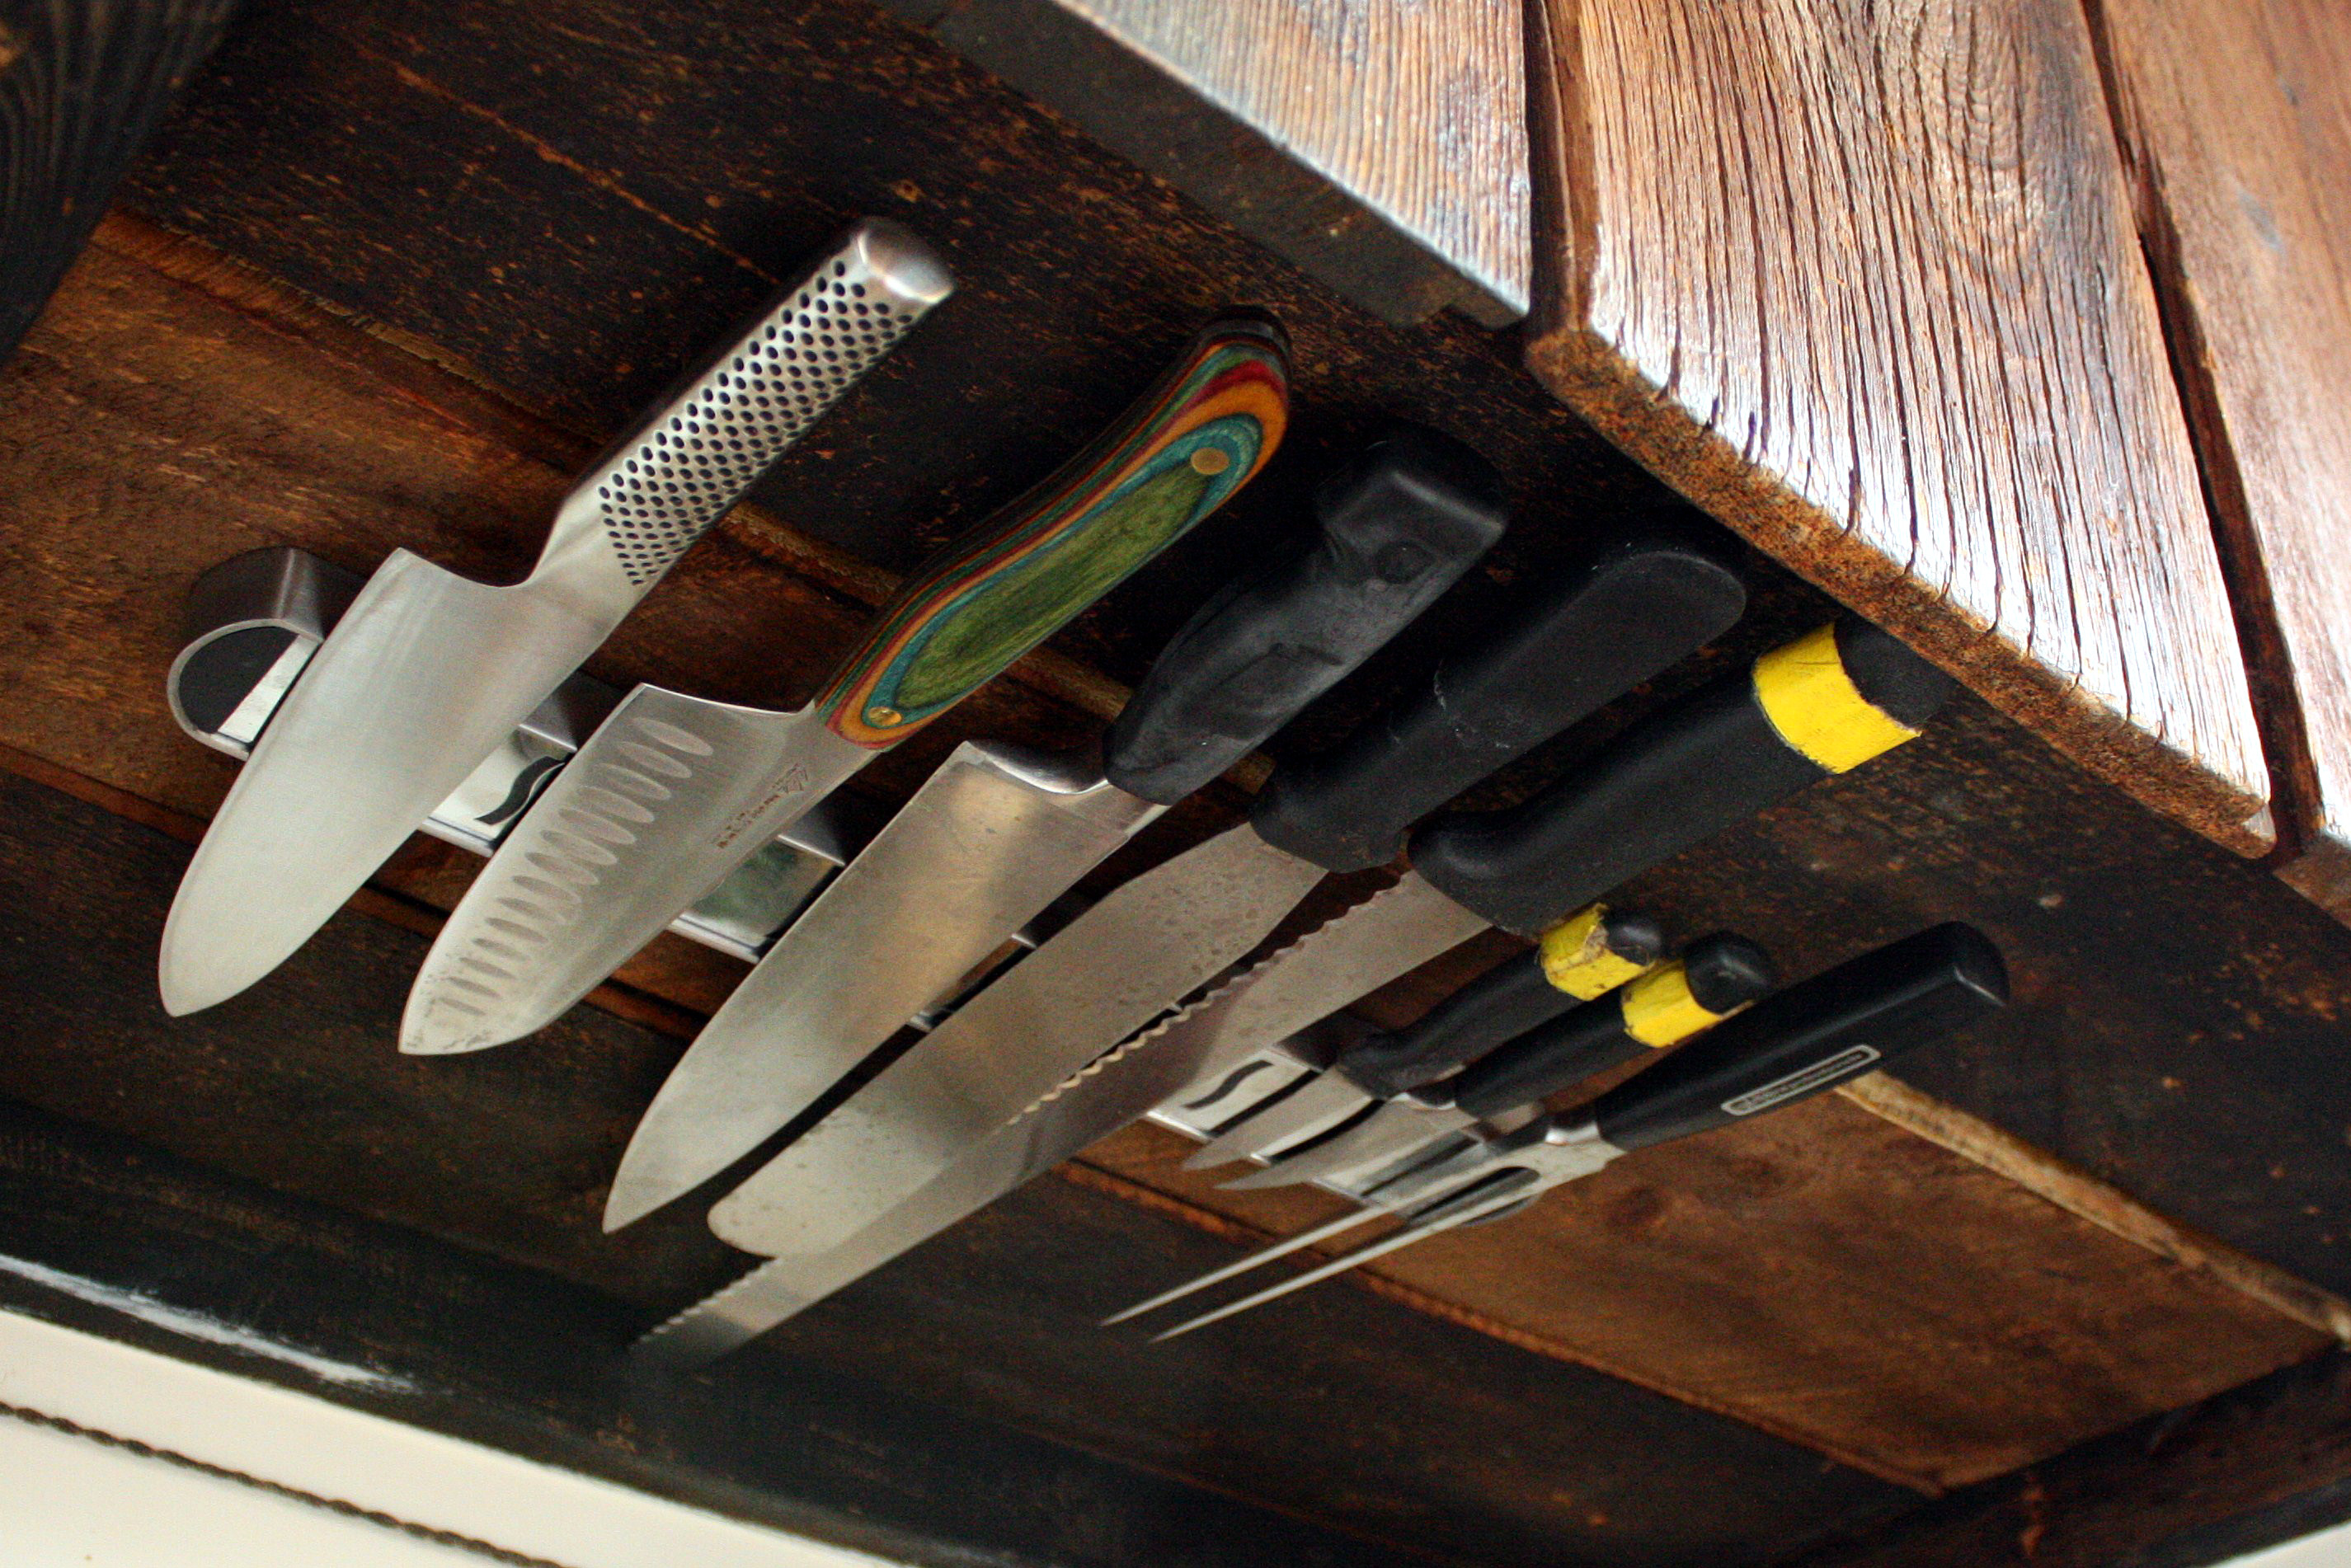 Space Solutions: Under-Cabinet Knife Rack